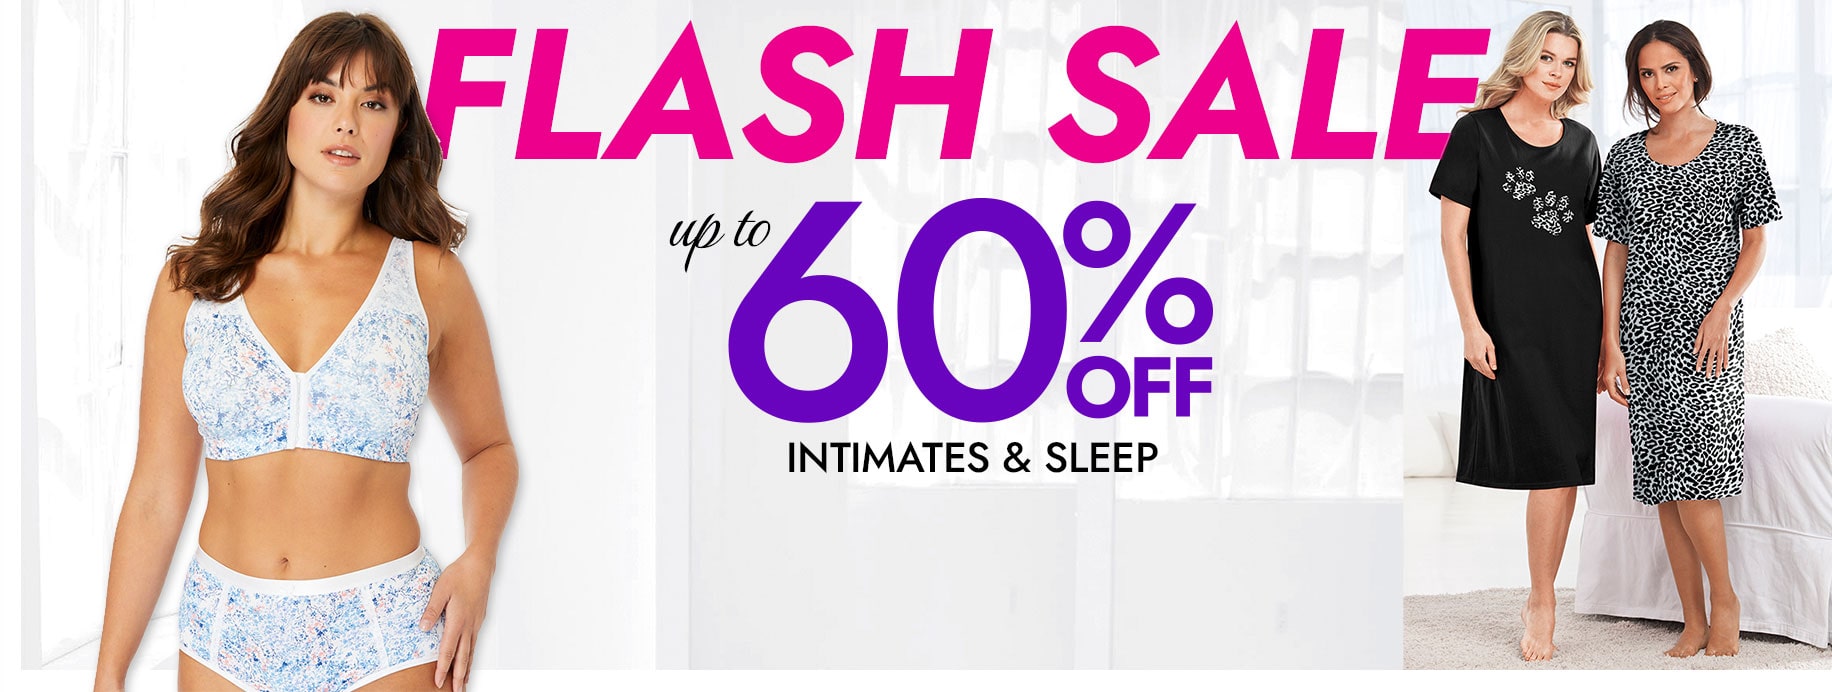 flash sale up to 60% off